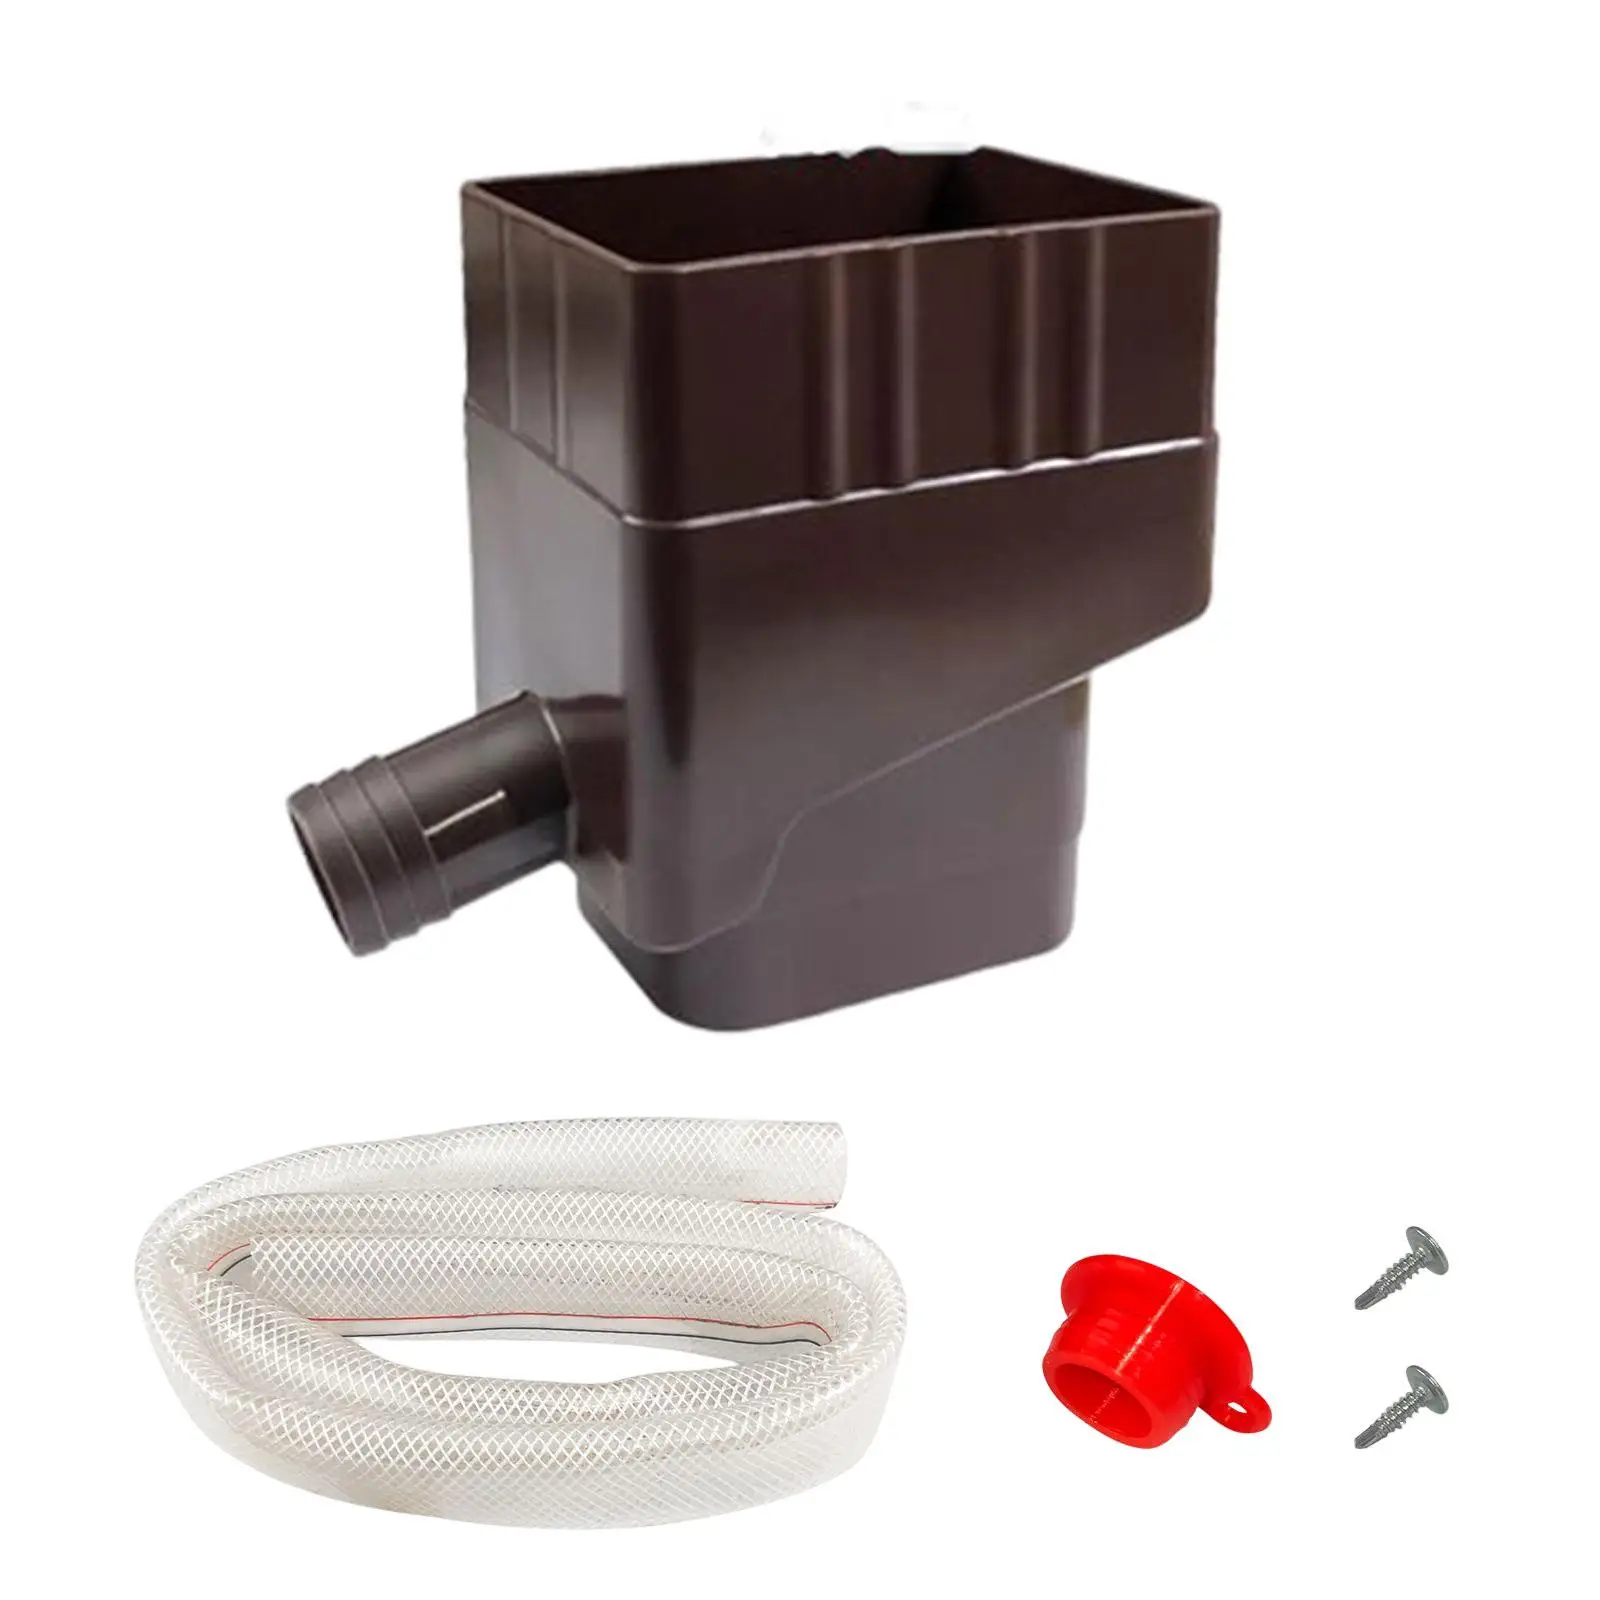 Rain Water Collection System Yard Gutter Drain with Hose Rainwater Collector